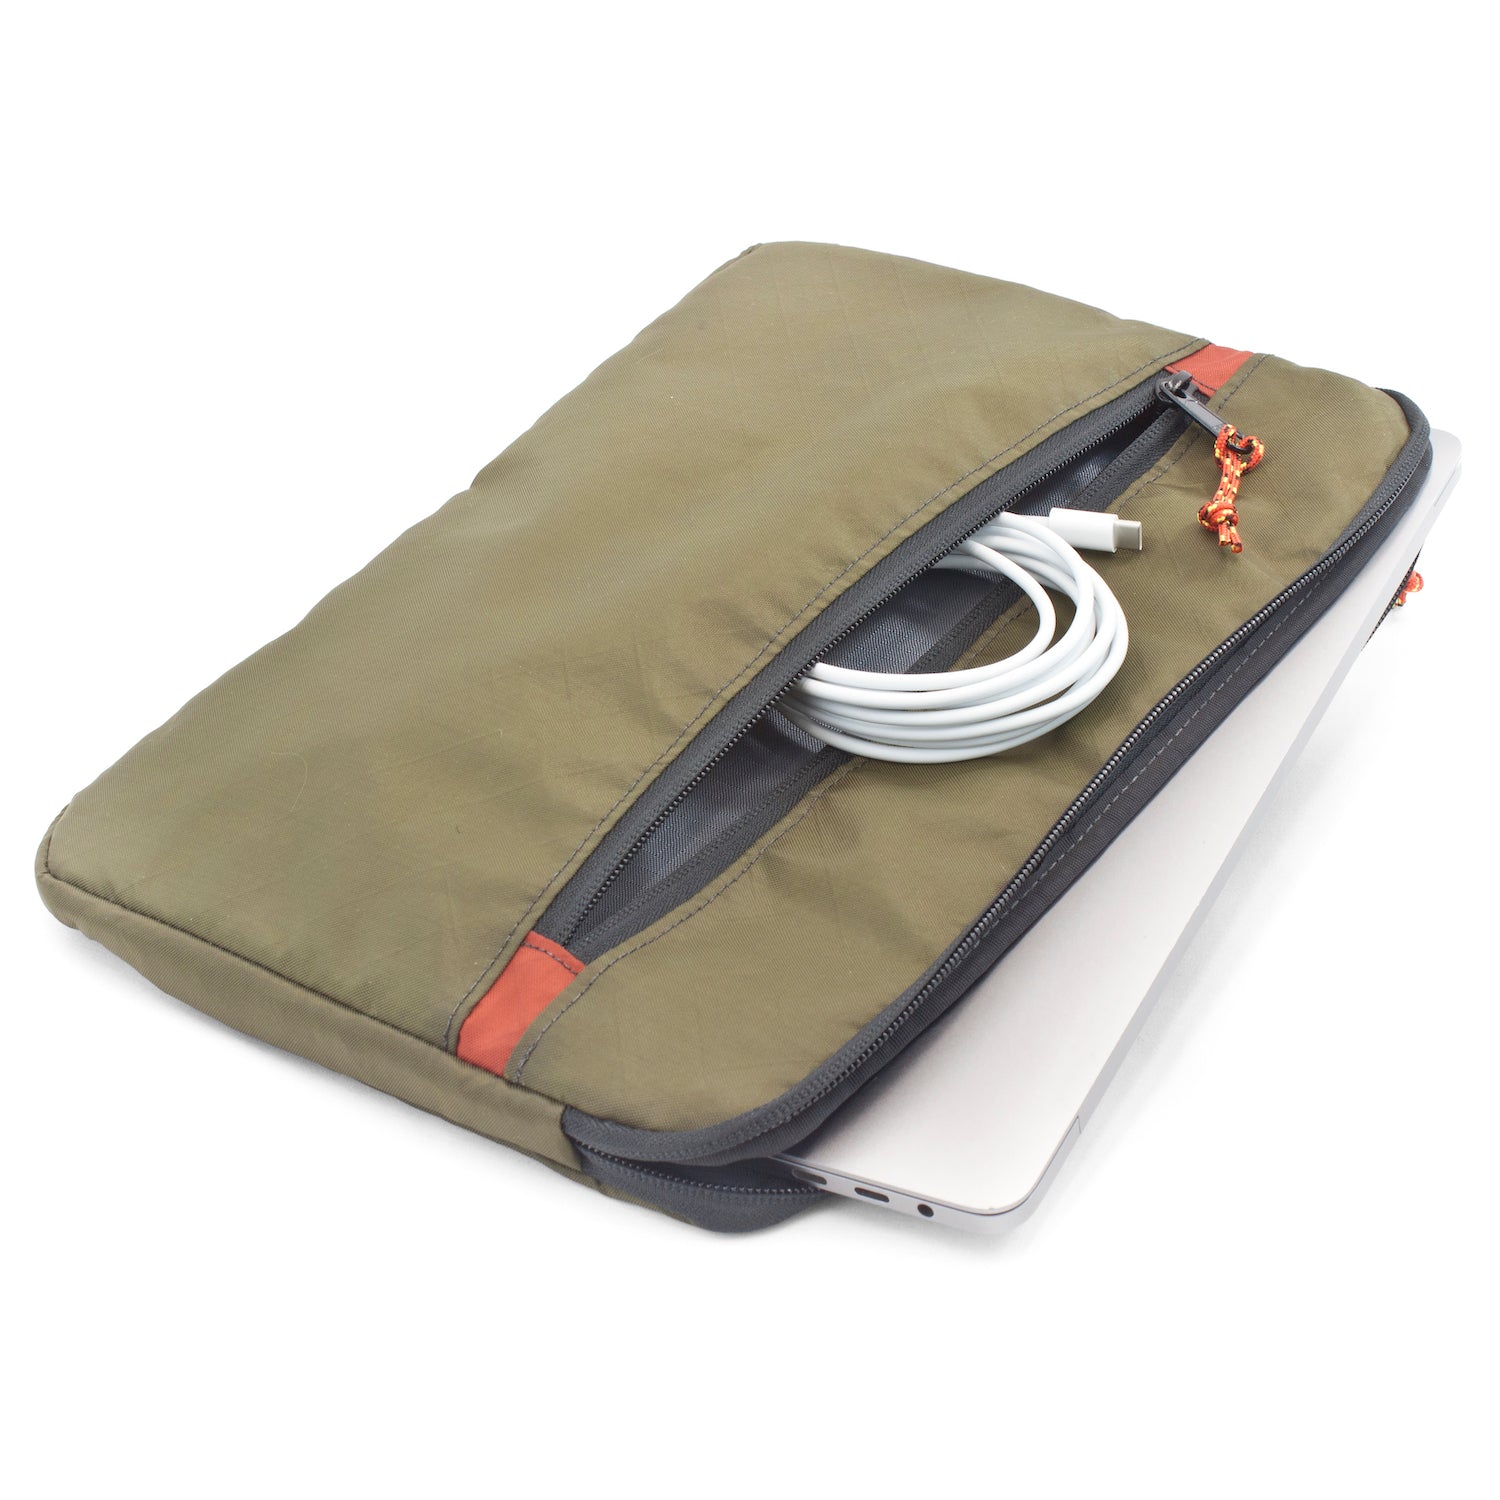 Flowfold Expedition Briefcase, EcoPak: Recycled Navy